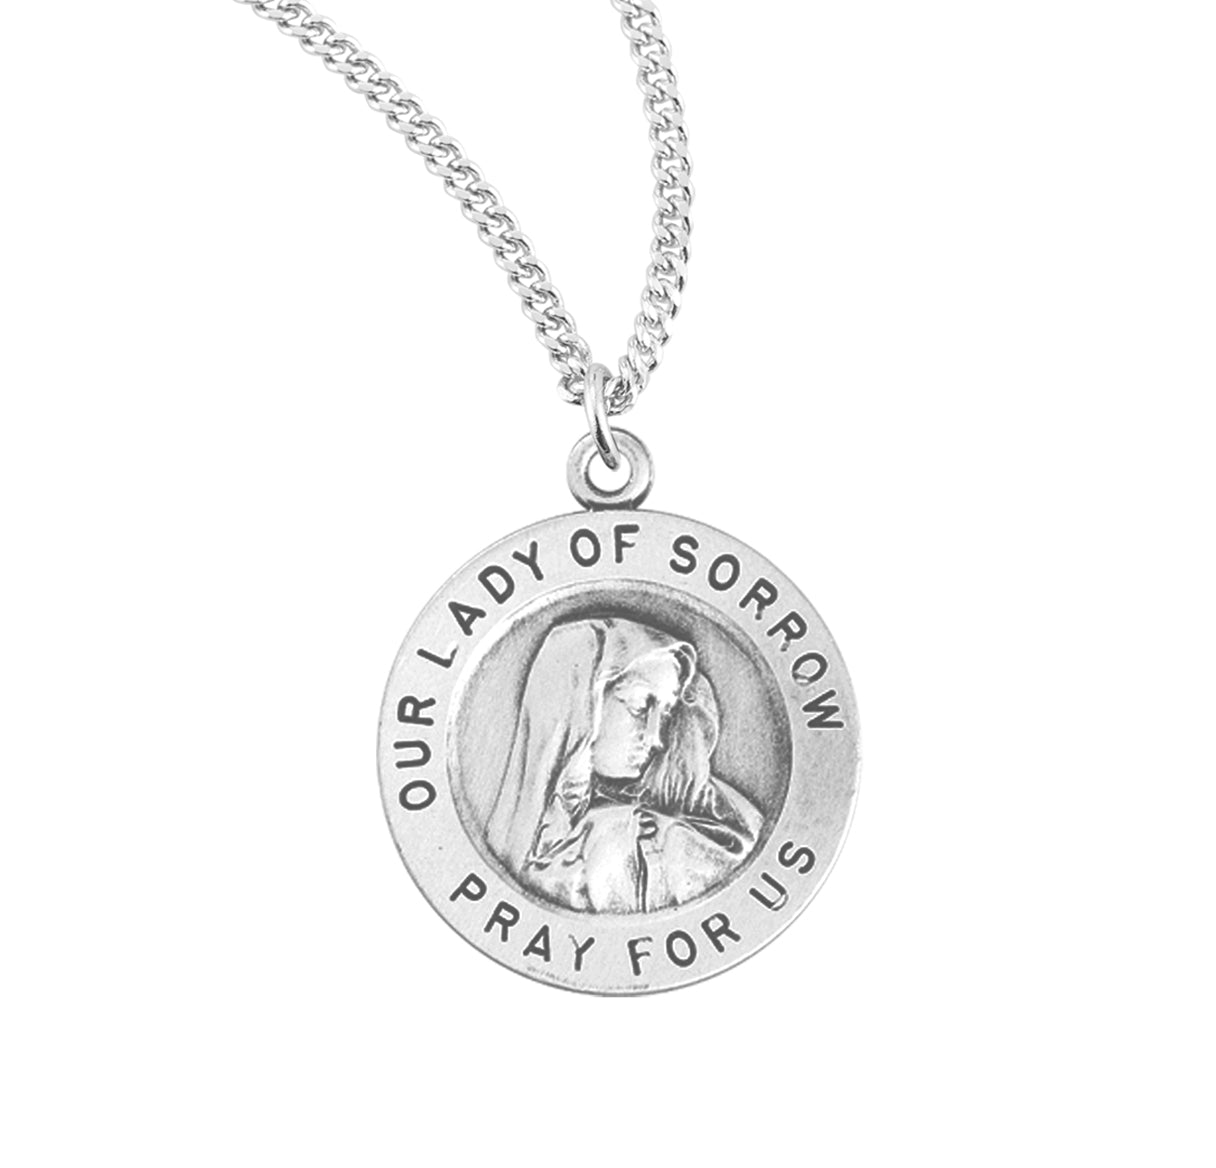 Our Lady of Sorrows Round Sterling Silver Medal